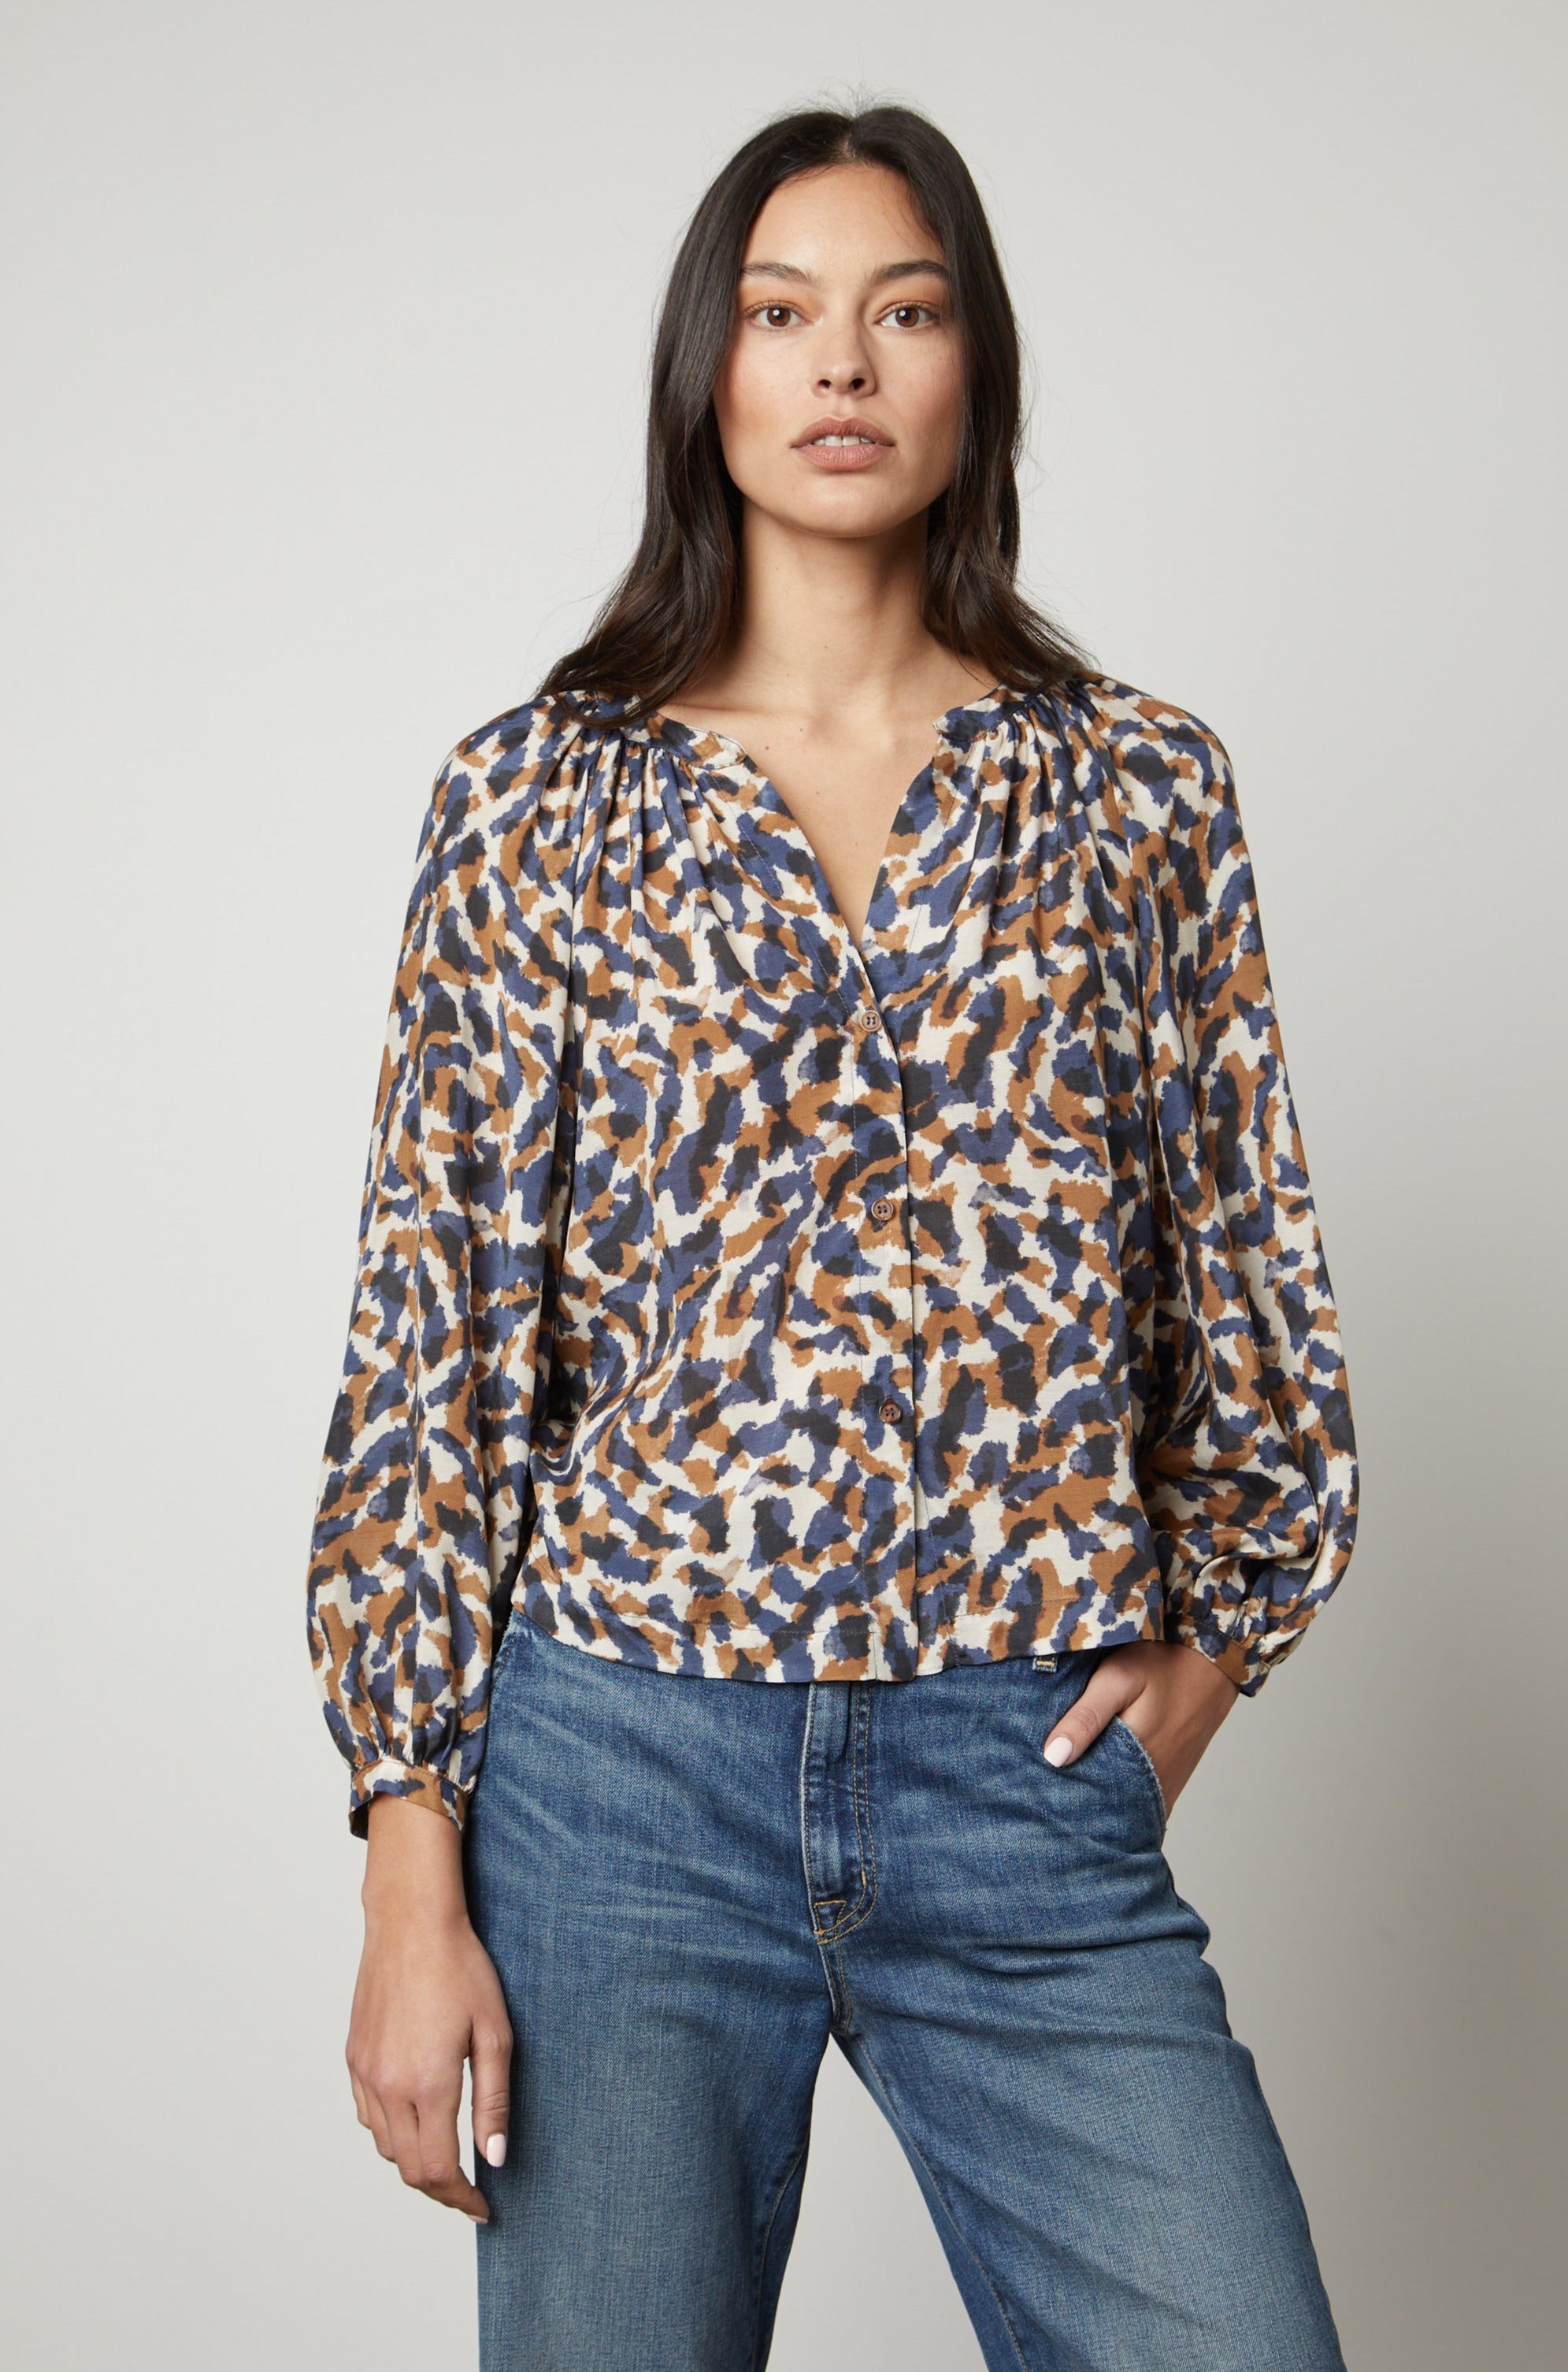   The model is wearing jeans and a Velvet by Graham & Spencer Melinda Printed Button-Up Top. 